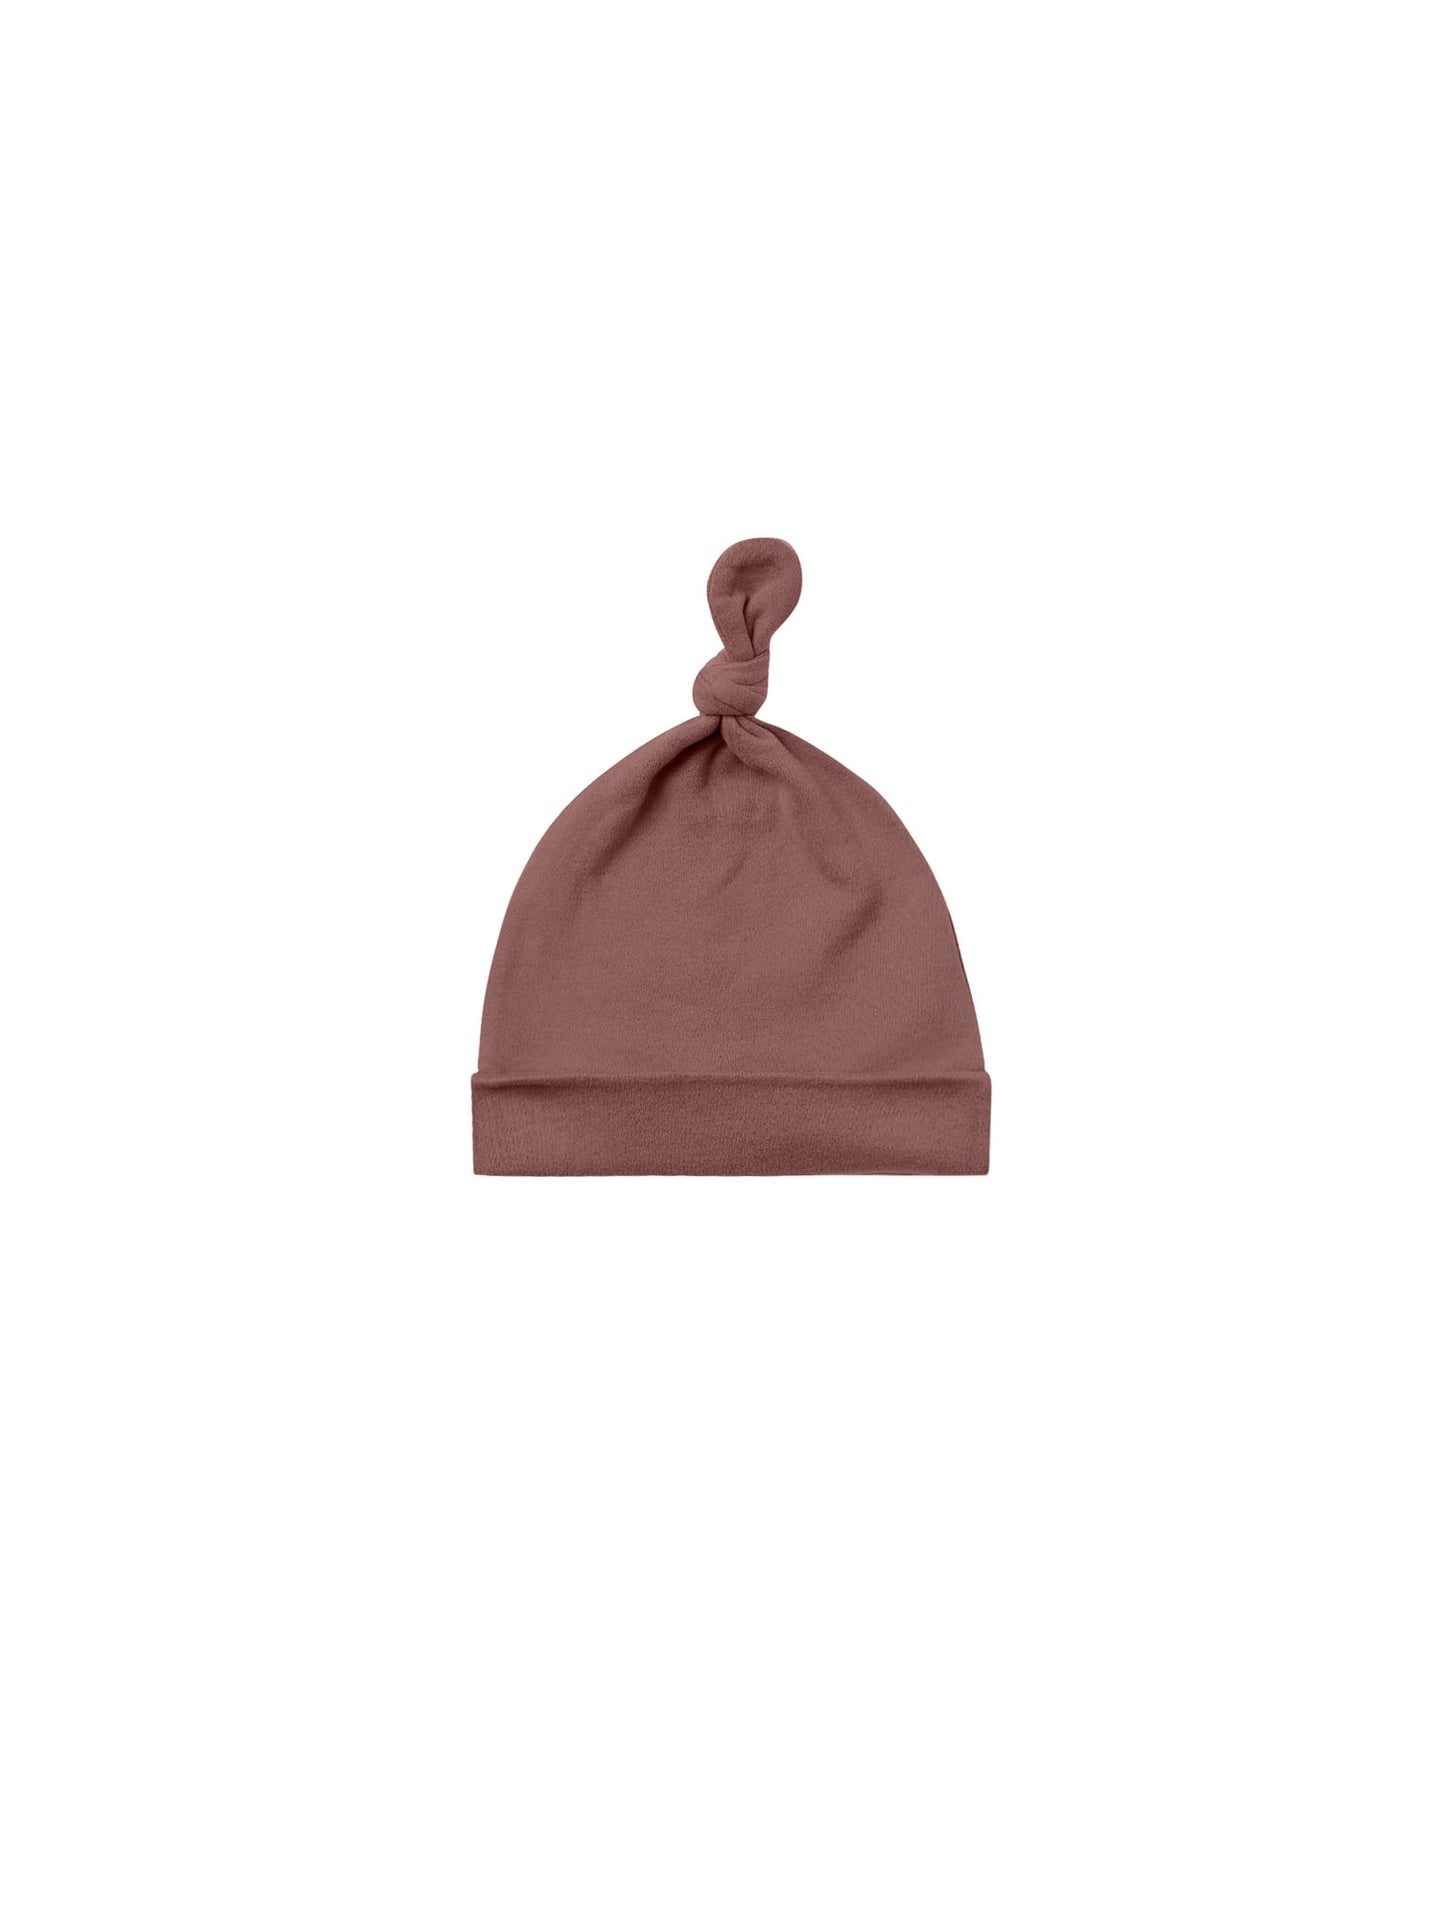 Knotted Baby Hat / Plum